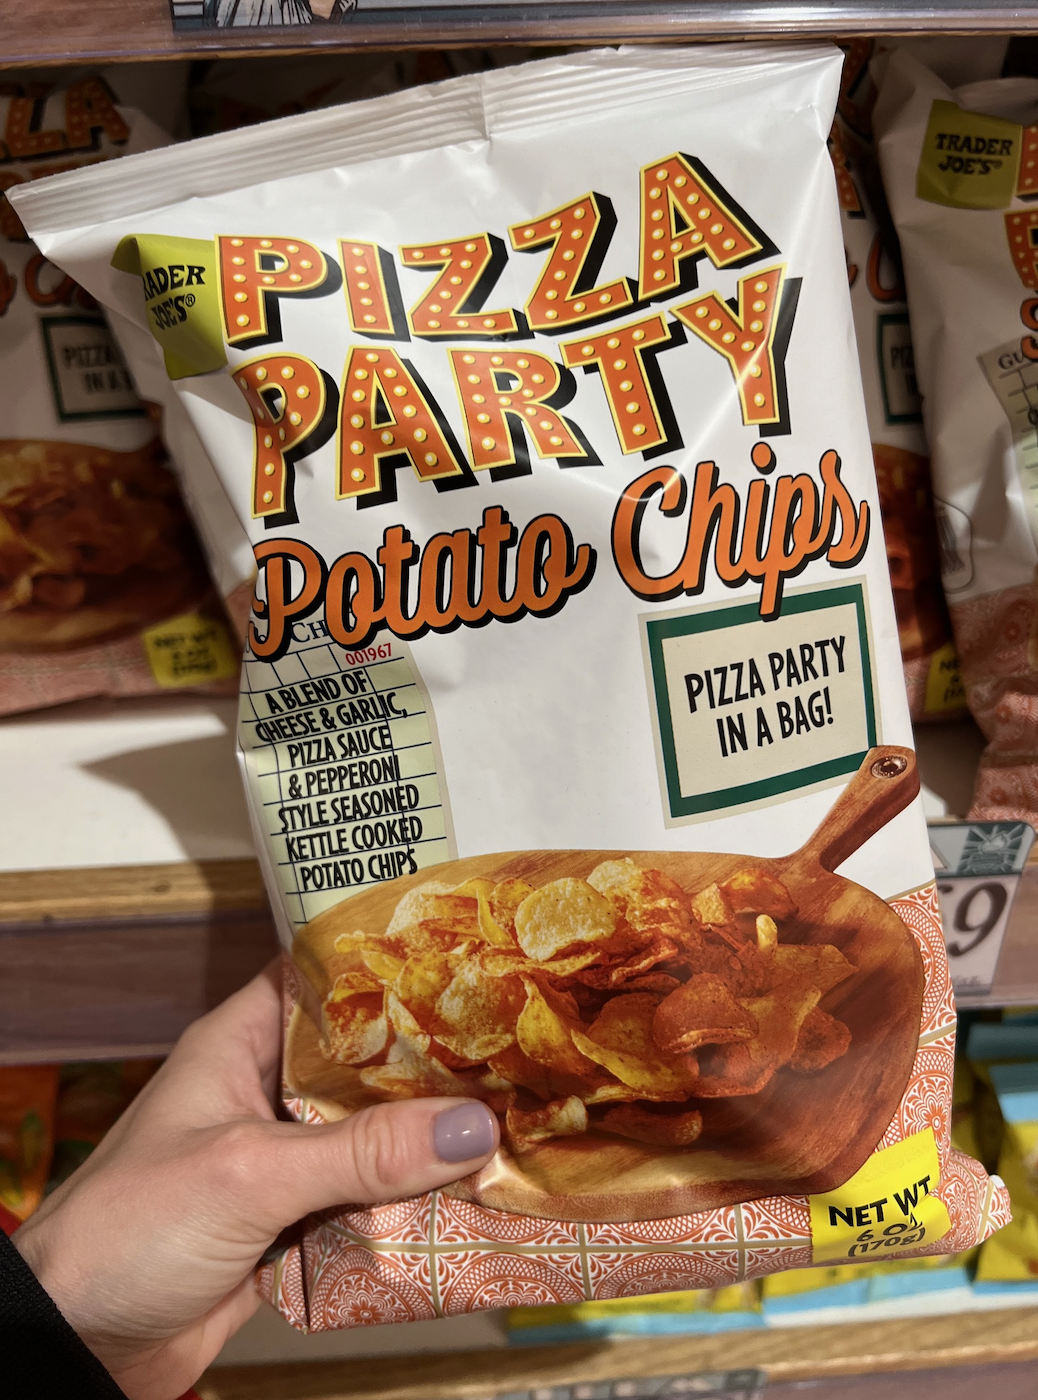 Hand holding a bag of Pizza Party Potato Chips with pizza-inspired flavors